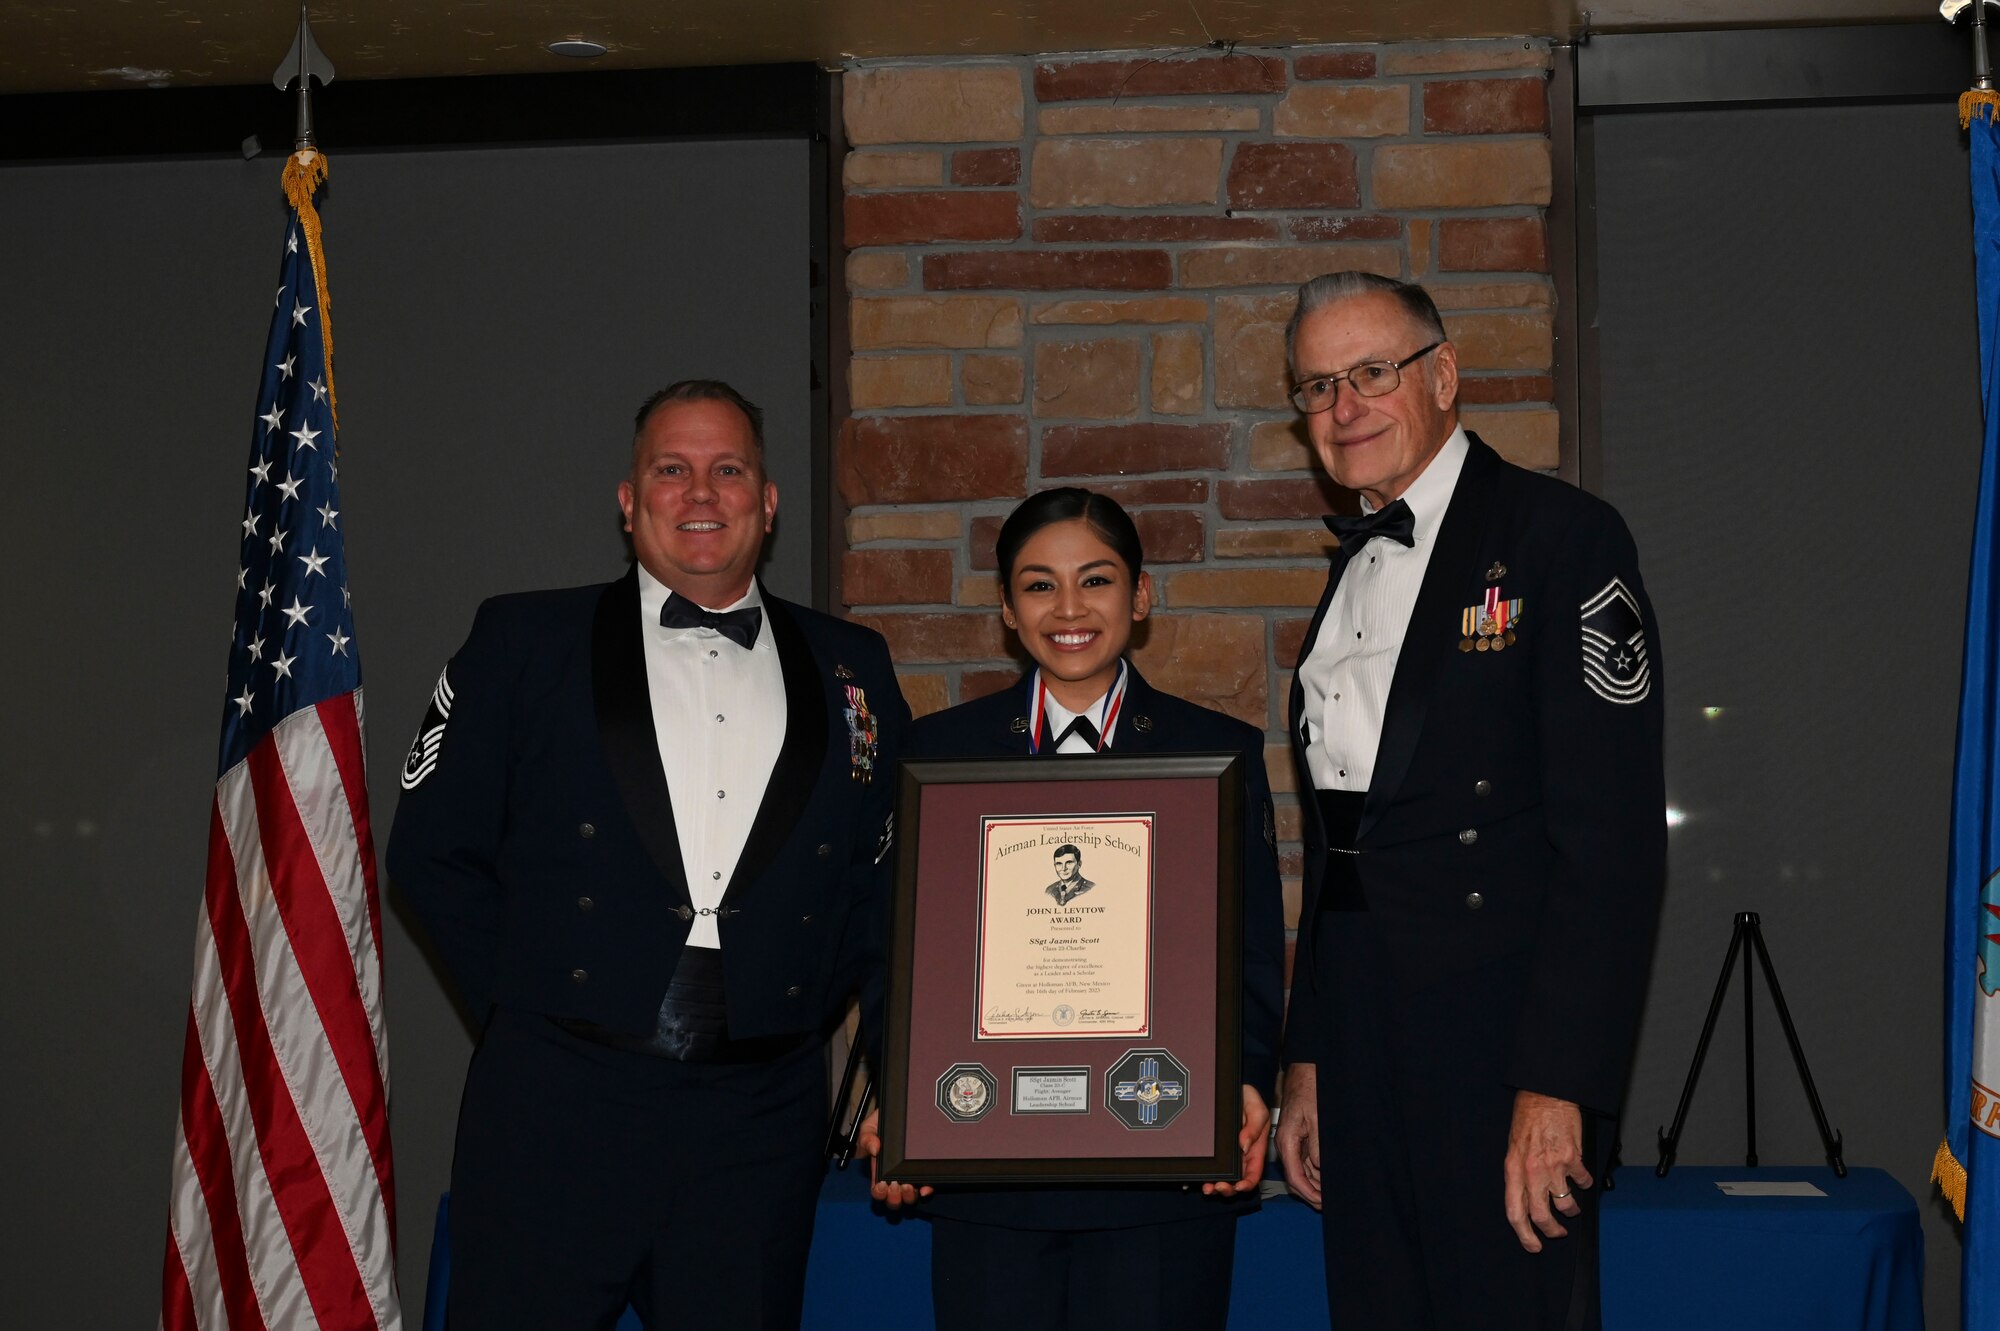 Staff Sgt. Jazmin Scott, 49th Logistics Readiness Squadron, Airman Leadership School graduate, center, accepts the John L. Levitow award during the graduation of ALS class 23-C at Holloman Air Force Base, New Mexico, Feb. 16, 2023. The John L. Levitow award is presented to the student demonstrating the highest level of leadership and scholastic performance and is partially determined by the assignment of points by their peers. (U.S. Air Force photo by Airman 1st Class Isaiah Pedrazzini)